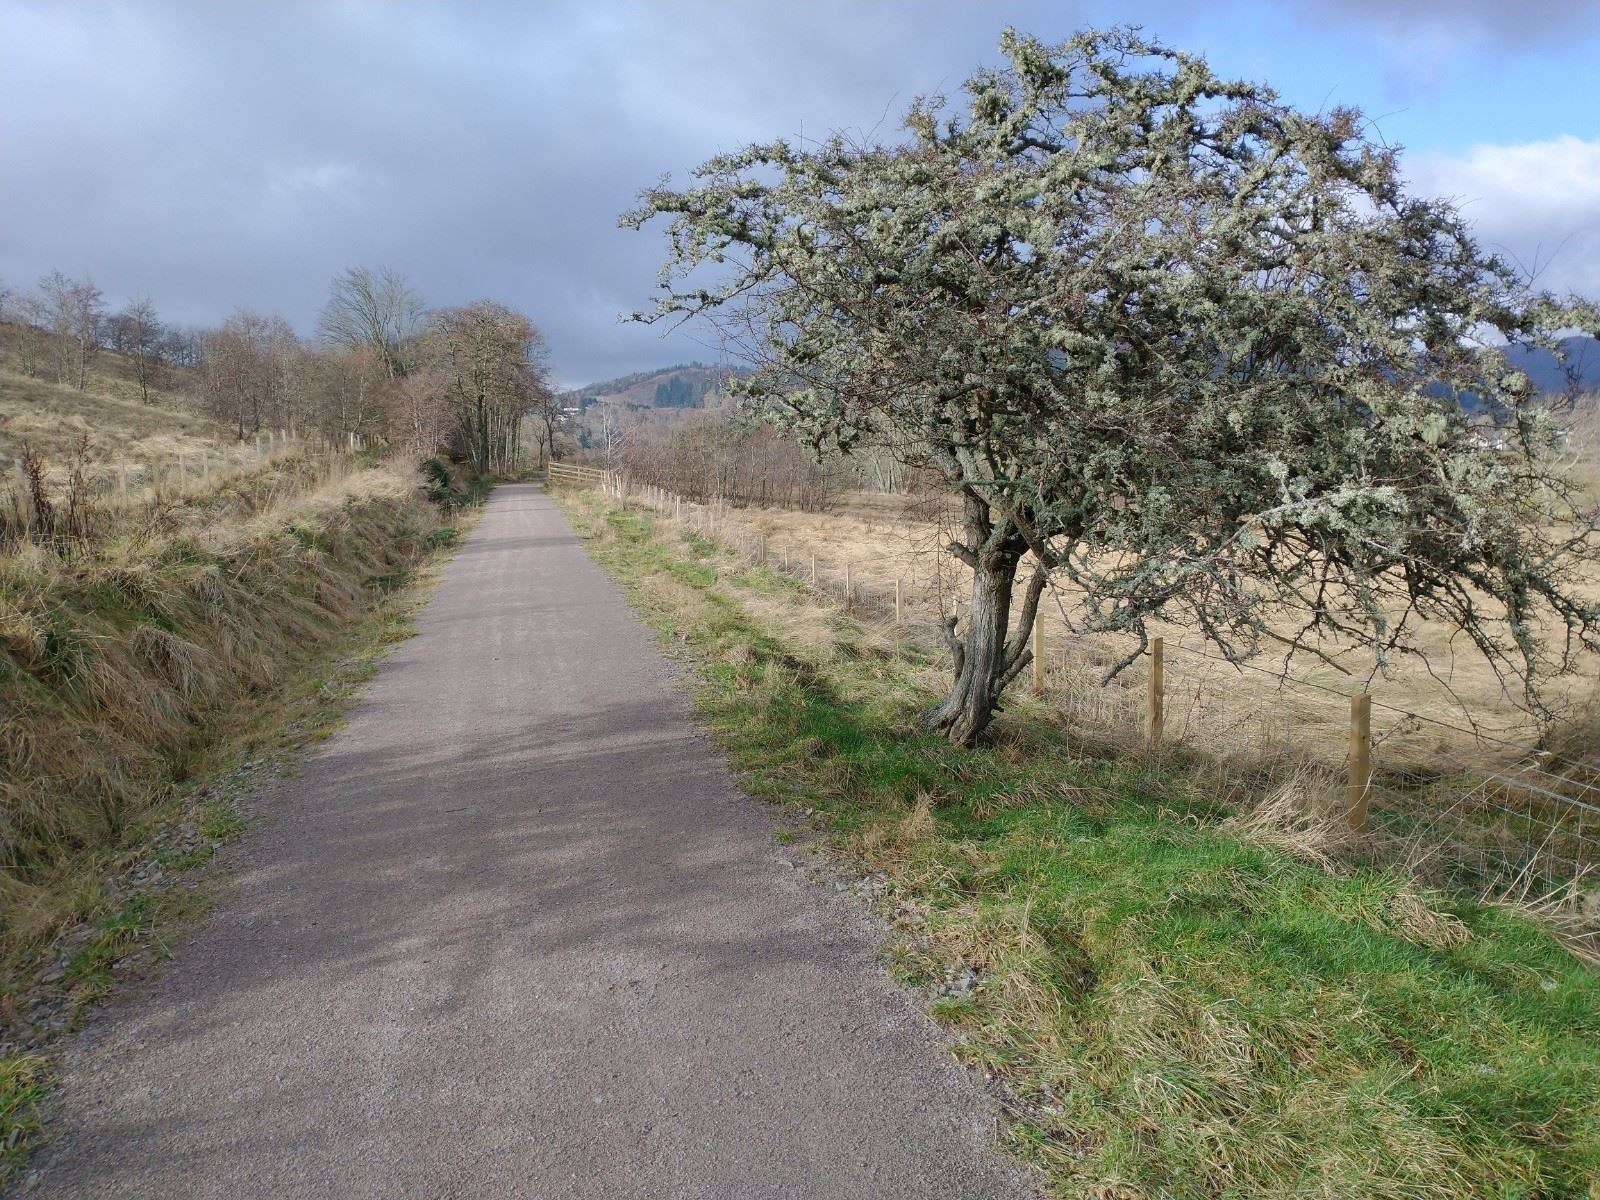 A stretch of the Peffery Way linking Strathpeffer and Dingwall off road.